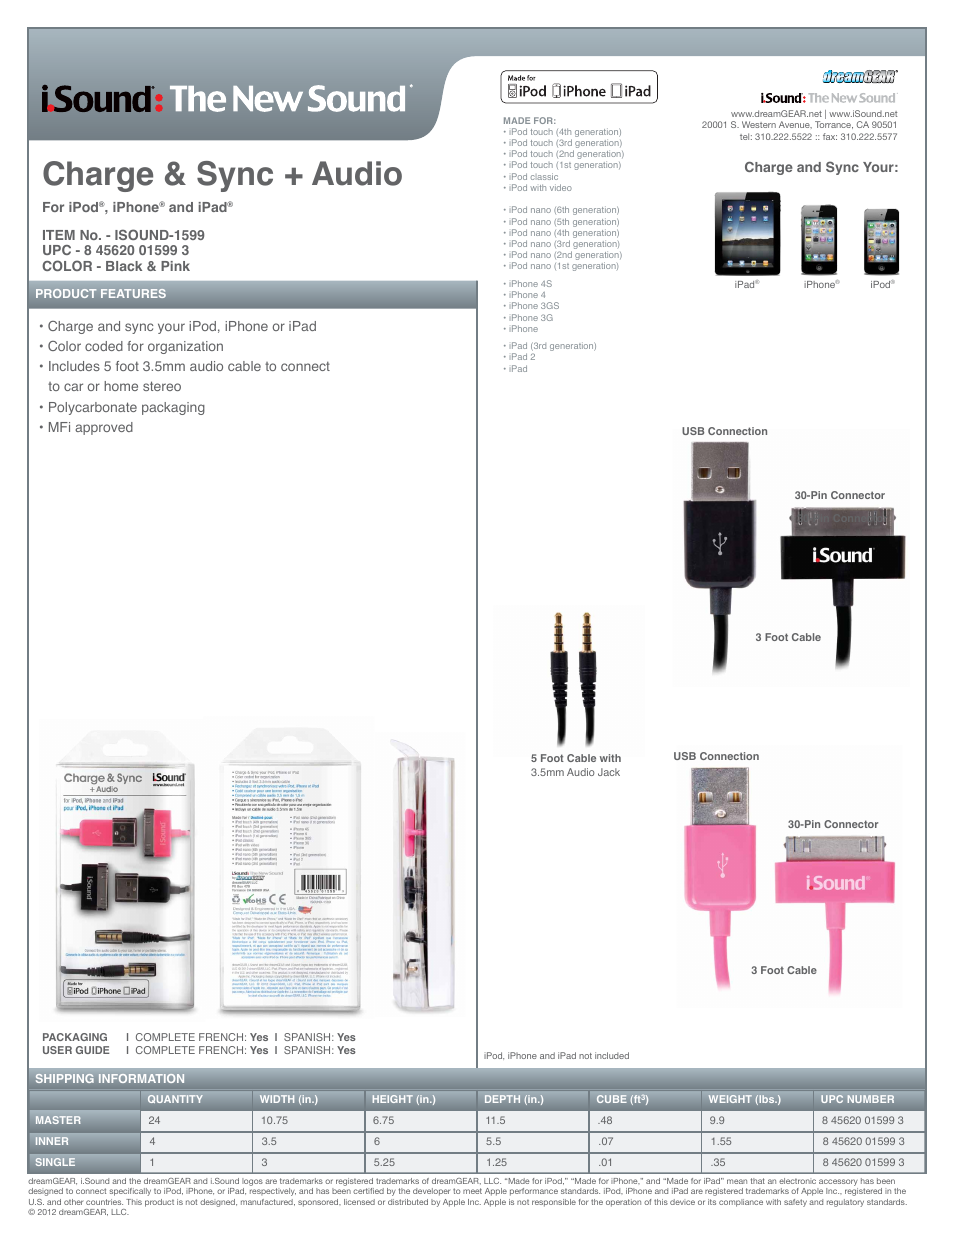 Charge & Sync + Audio for iPad iPhone and iPod - Sell Sheet